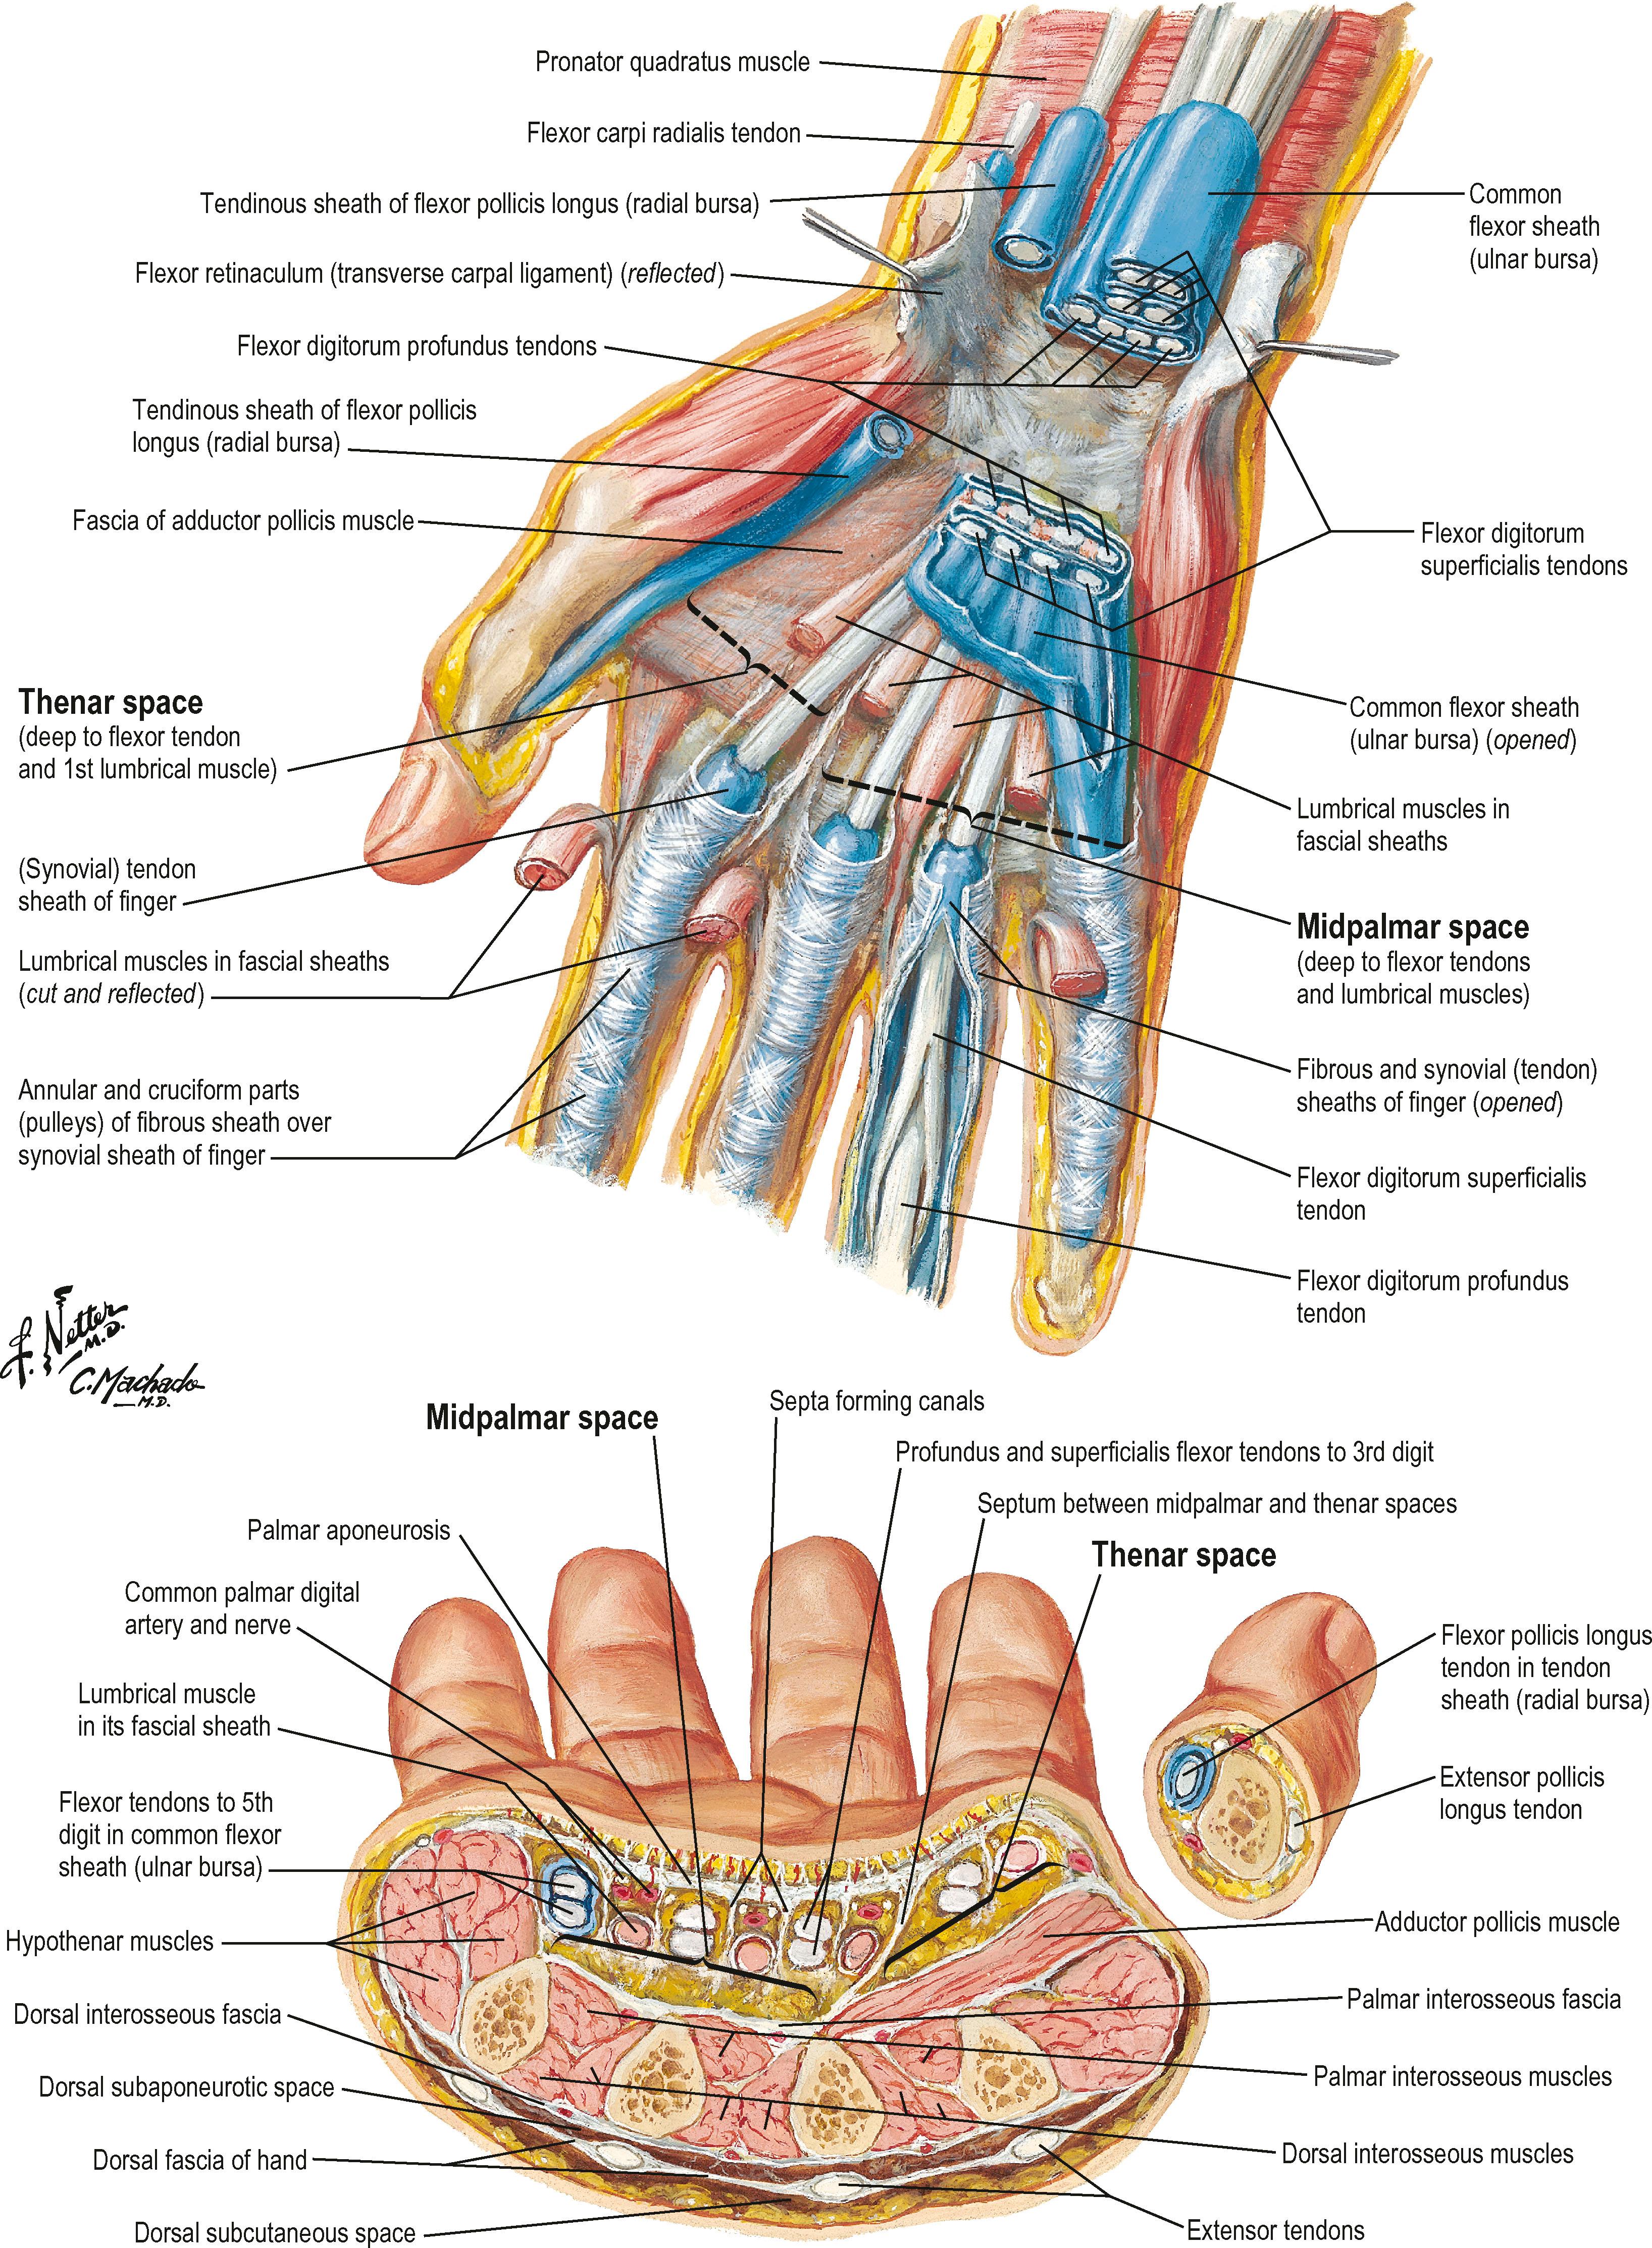 Figure 1.5, These deep palmar and midpalmar axial views of the hand reinforce the concept of distinct anatomic compartments separated by fascia.